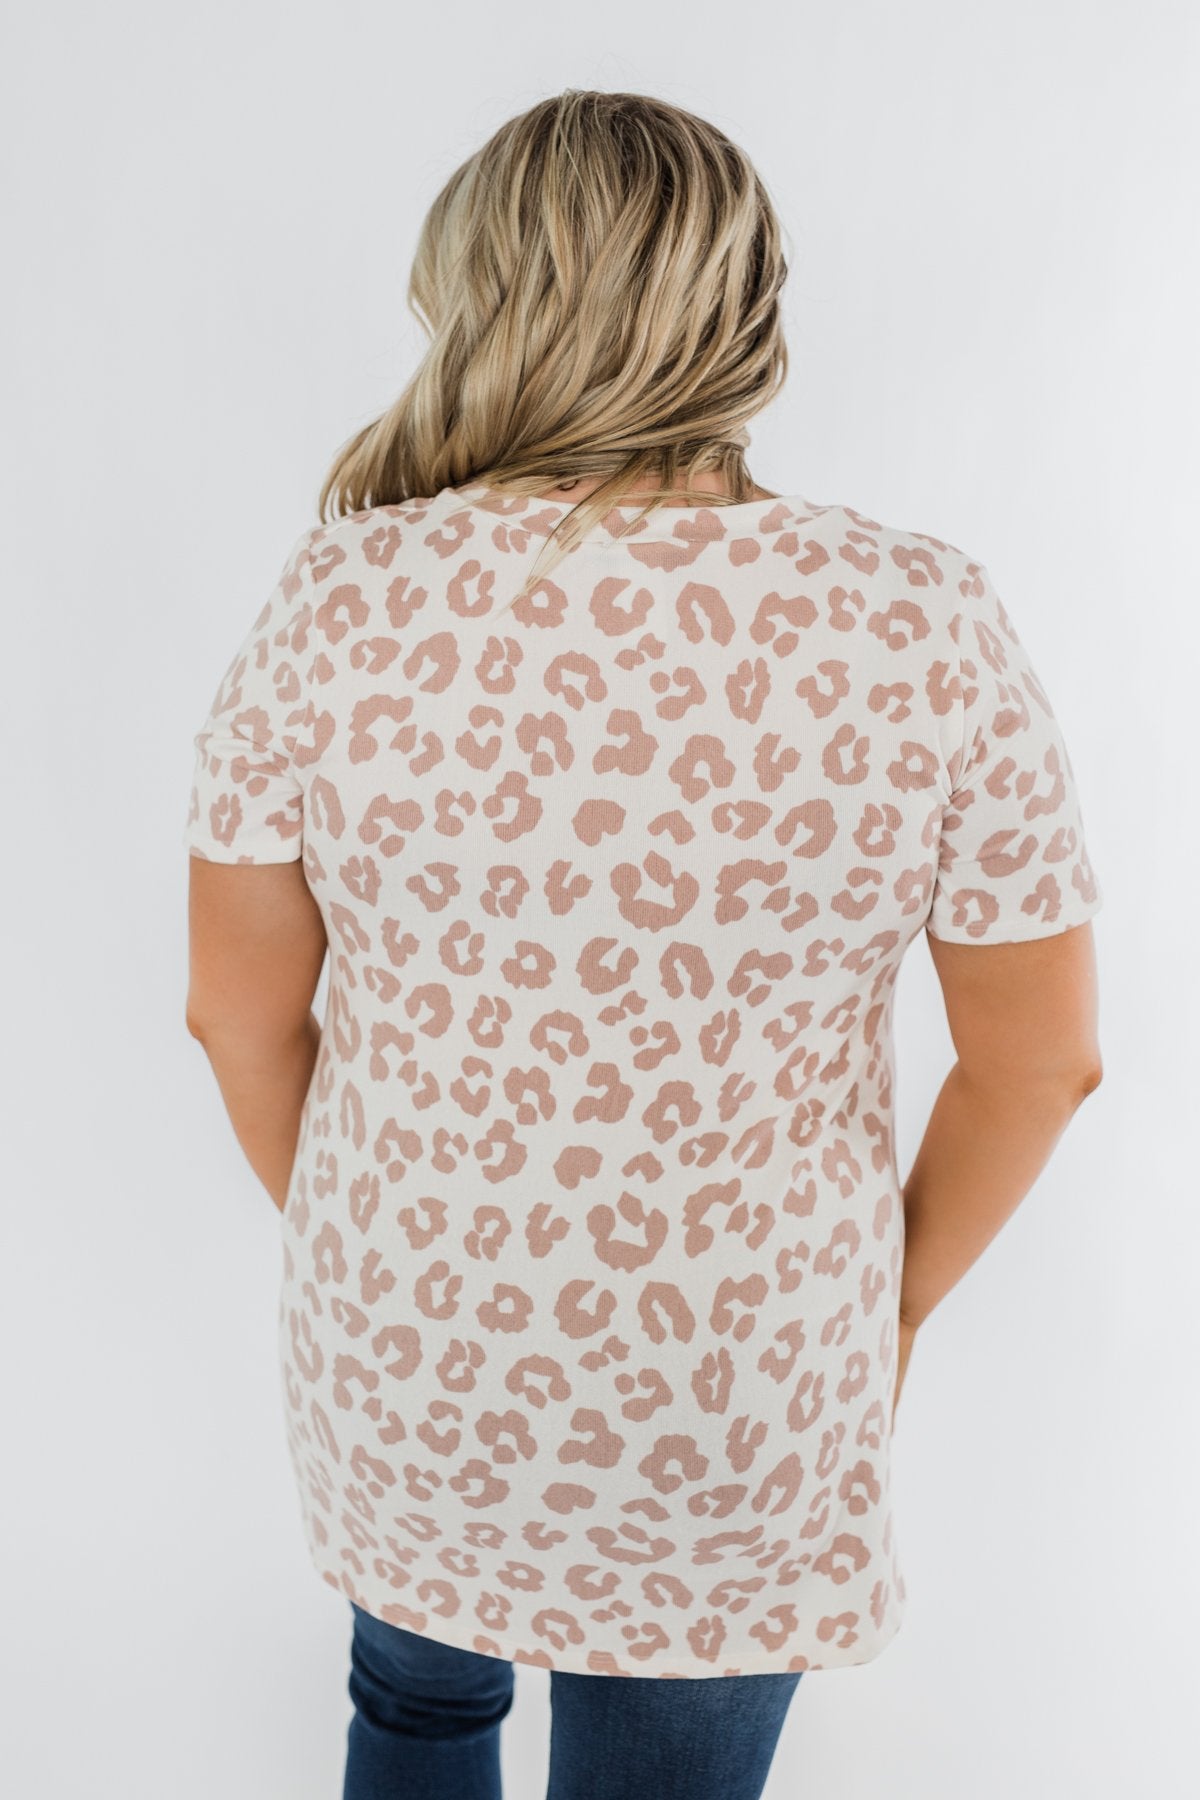 One Simple Wish Leopard V-Neck Top- Cream & Pale Taupe